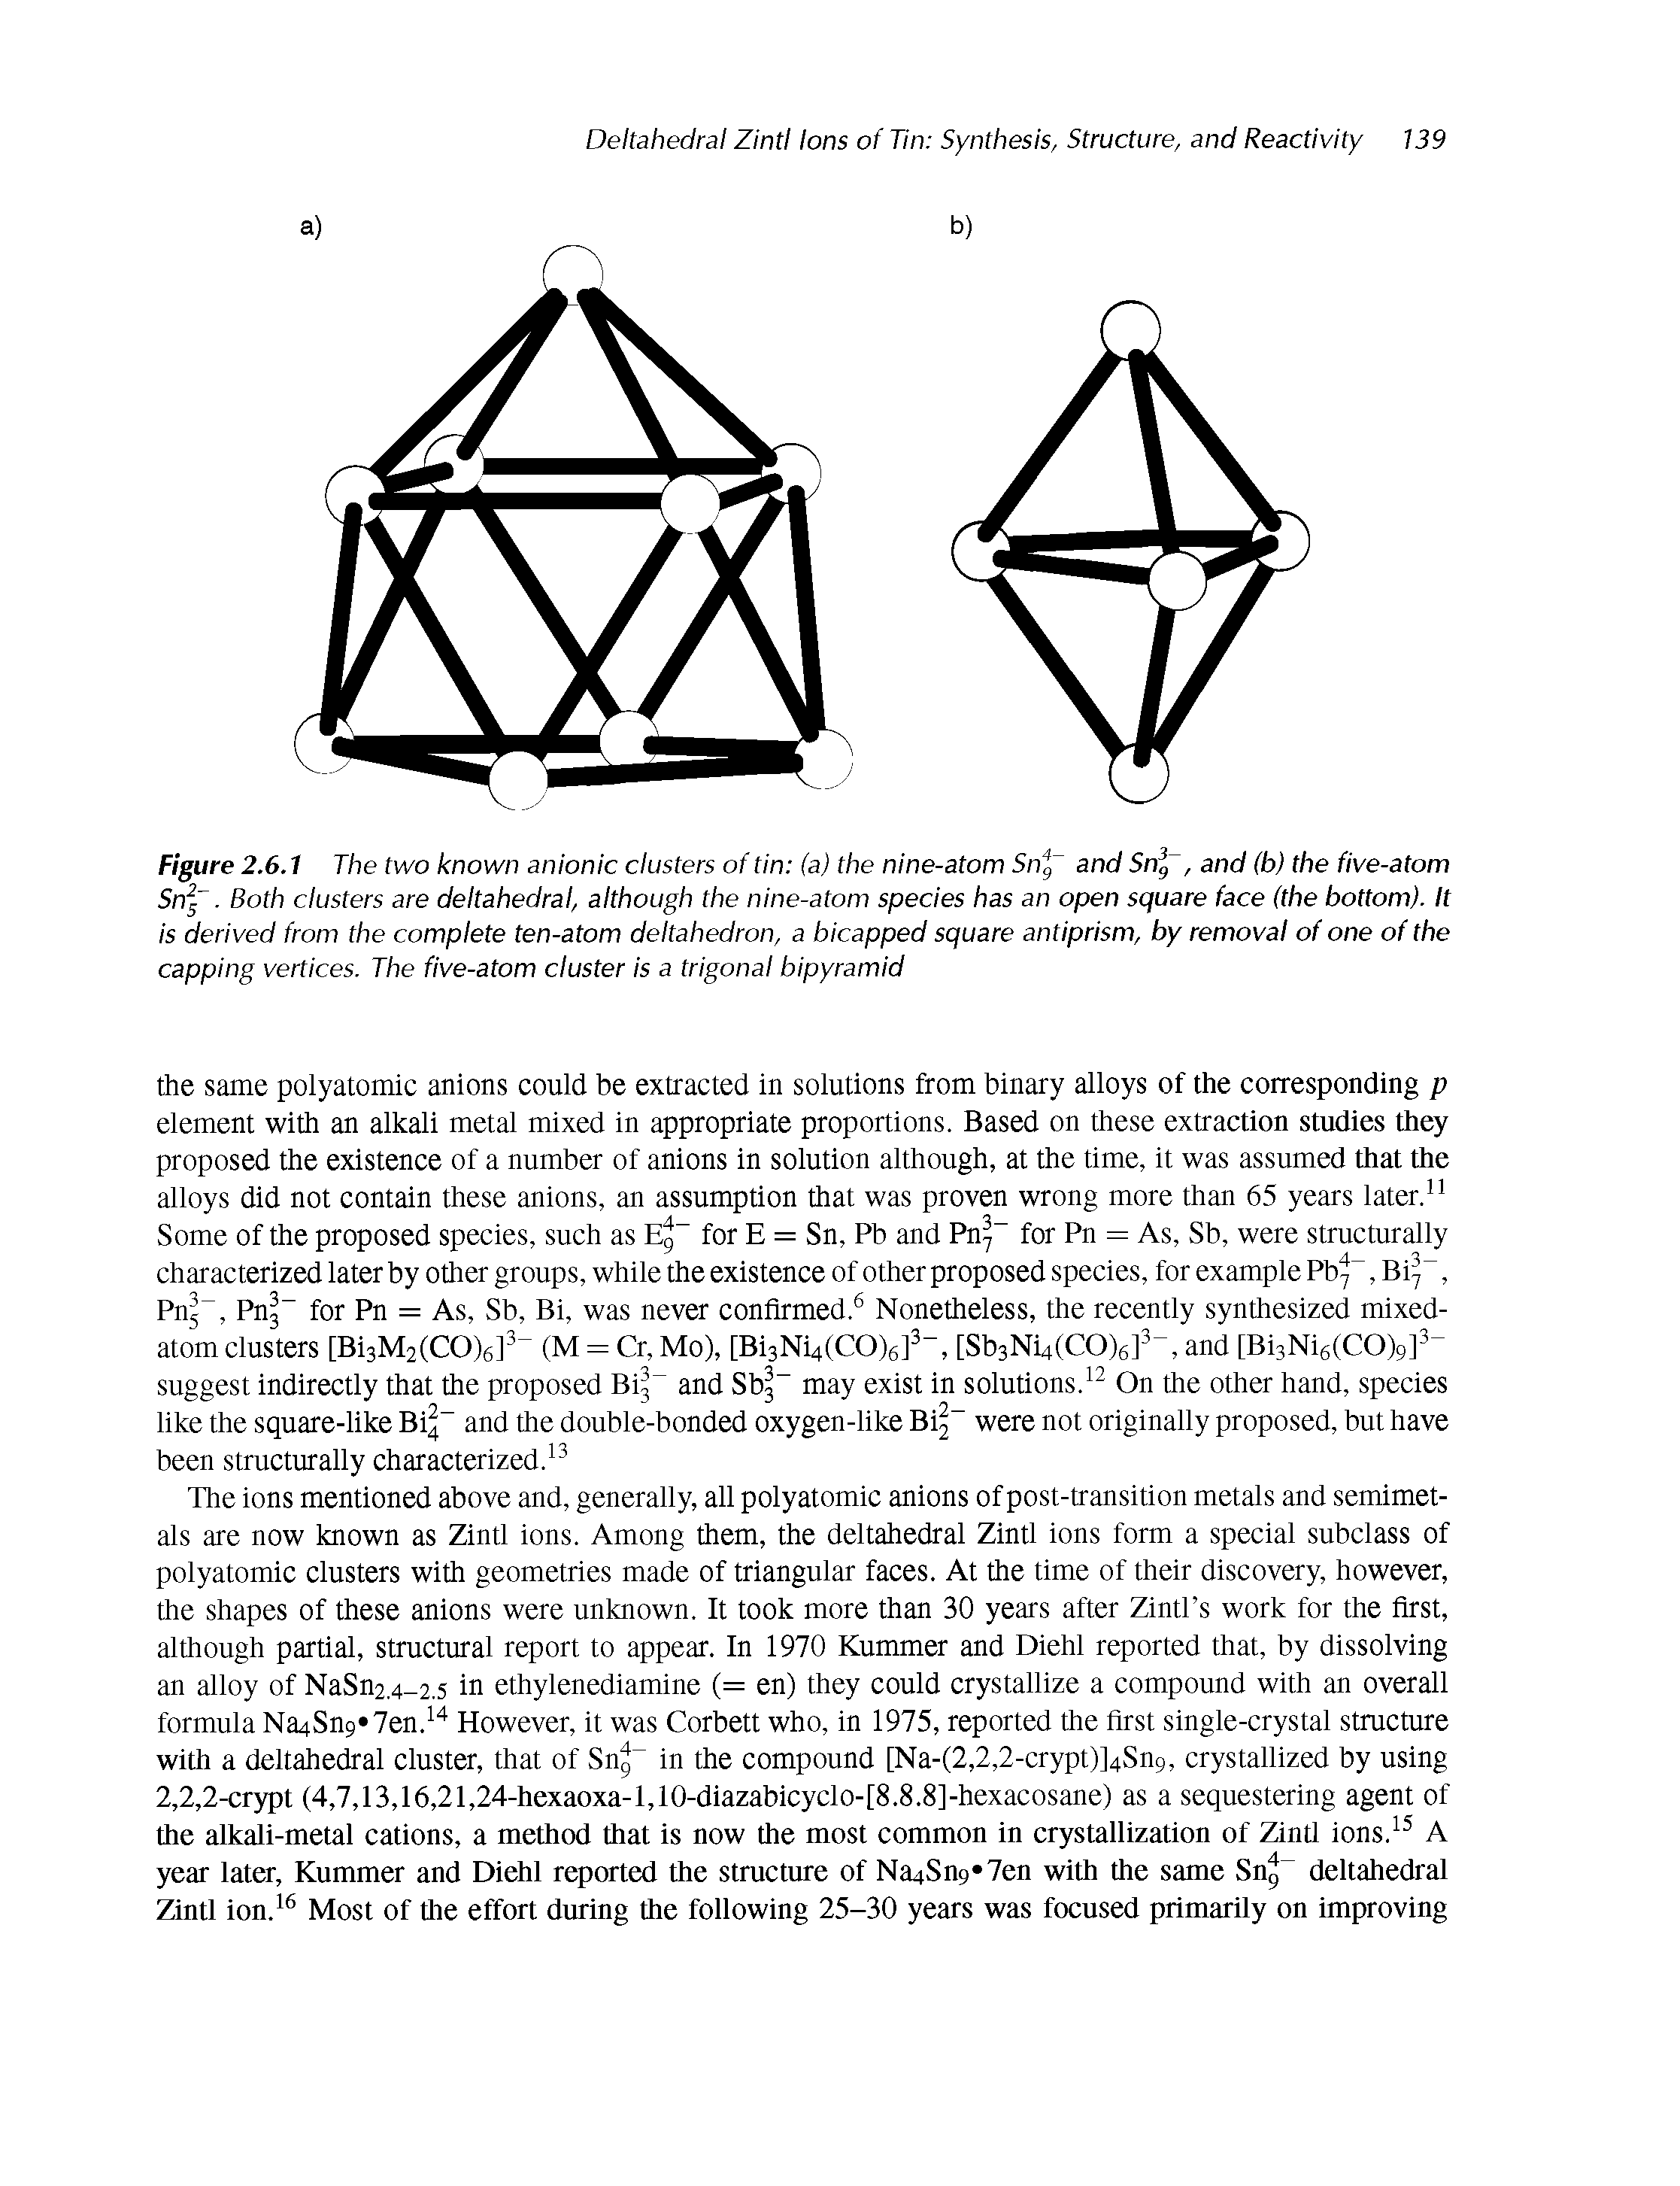 Figure 2.6.1 The two known anionic clusters of tin (a) the nine-atom Sng Snf. Both clusters are deltahedral, although the nine-atom species has an open square face (the bottom). It is derived from the complete ten-atom deltahedron, a bicapped square antiprism, by removal of one of the capping vertices. The five-atom cluster is a trigonal bipyramid...